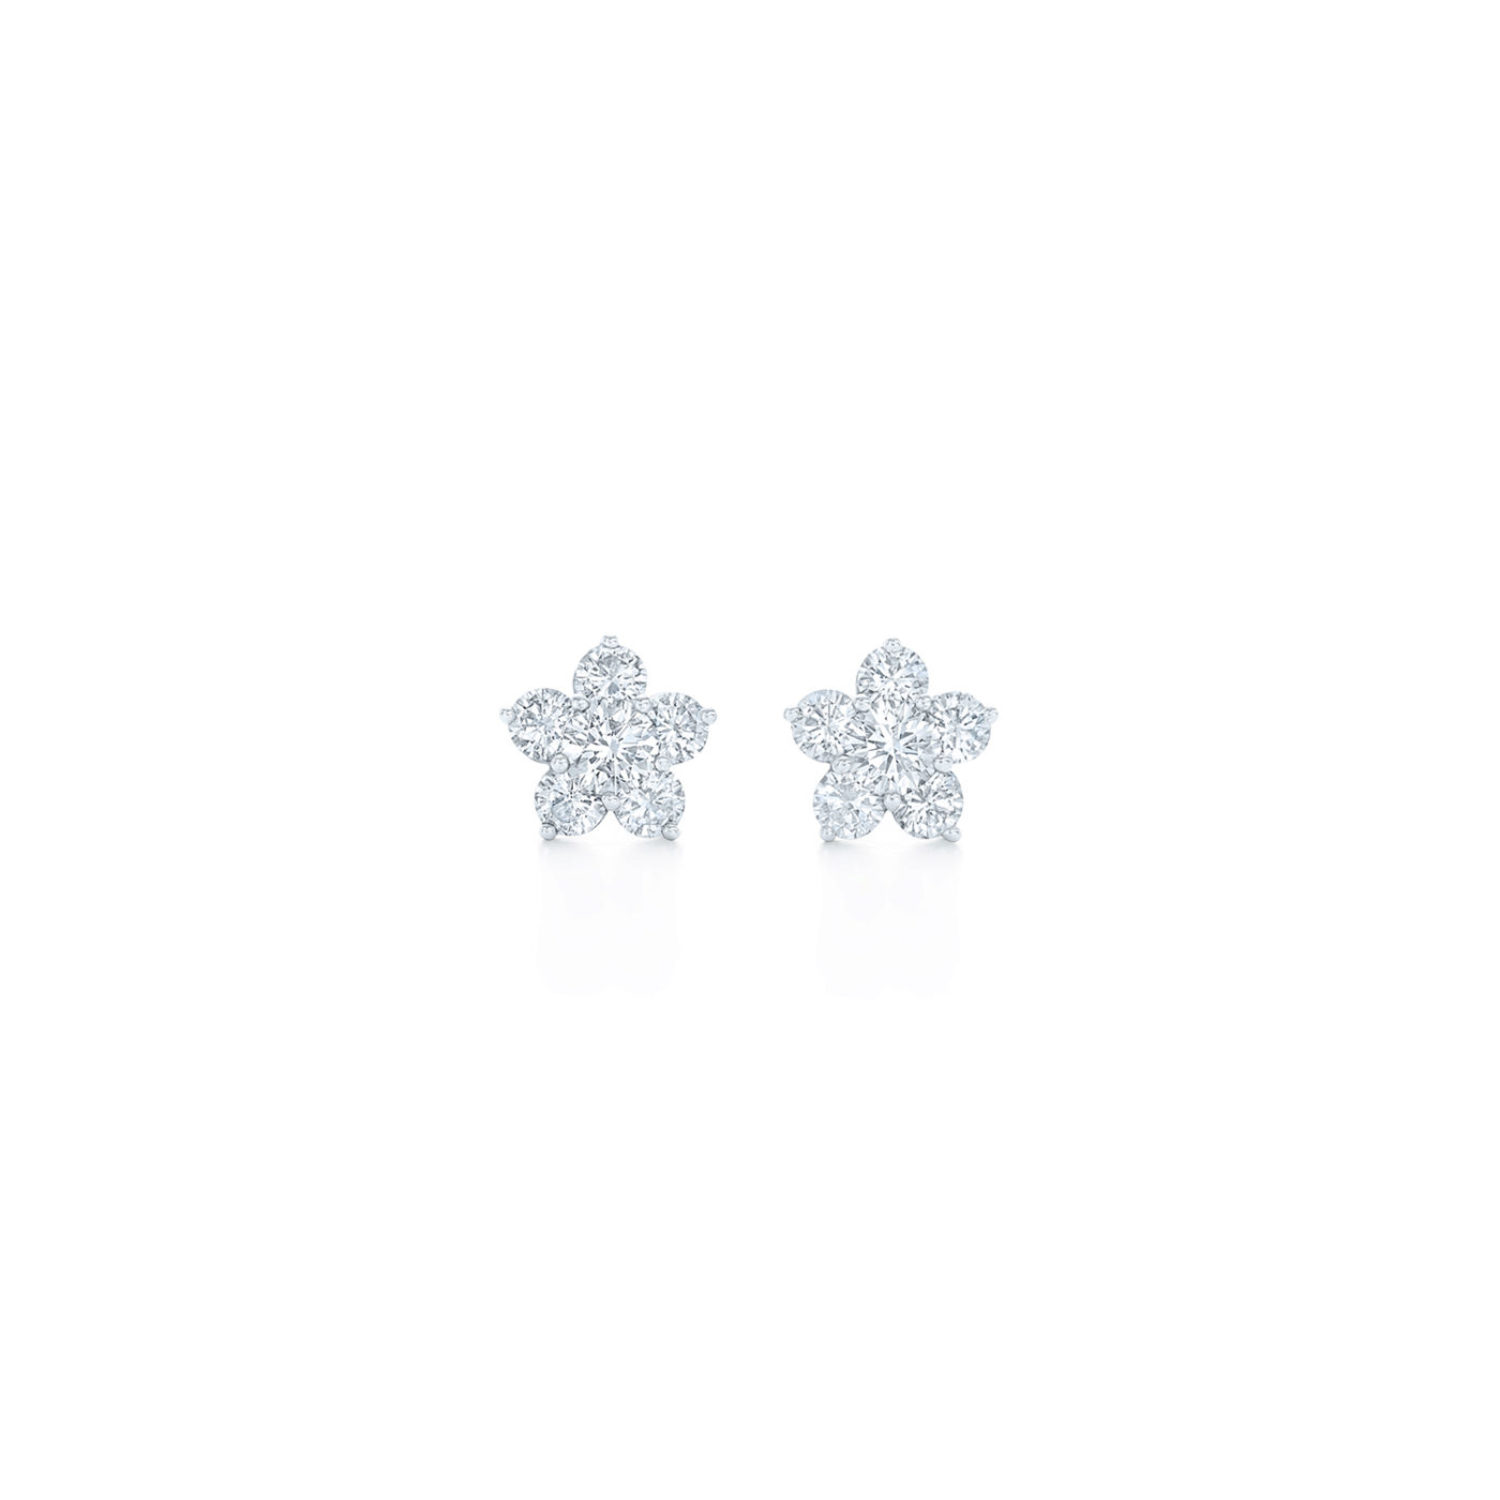 Floral Cluster Diamond Stud Earrings in 18K Yellow Gold